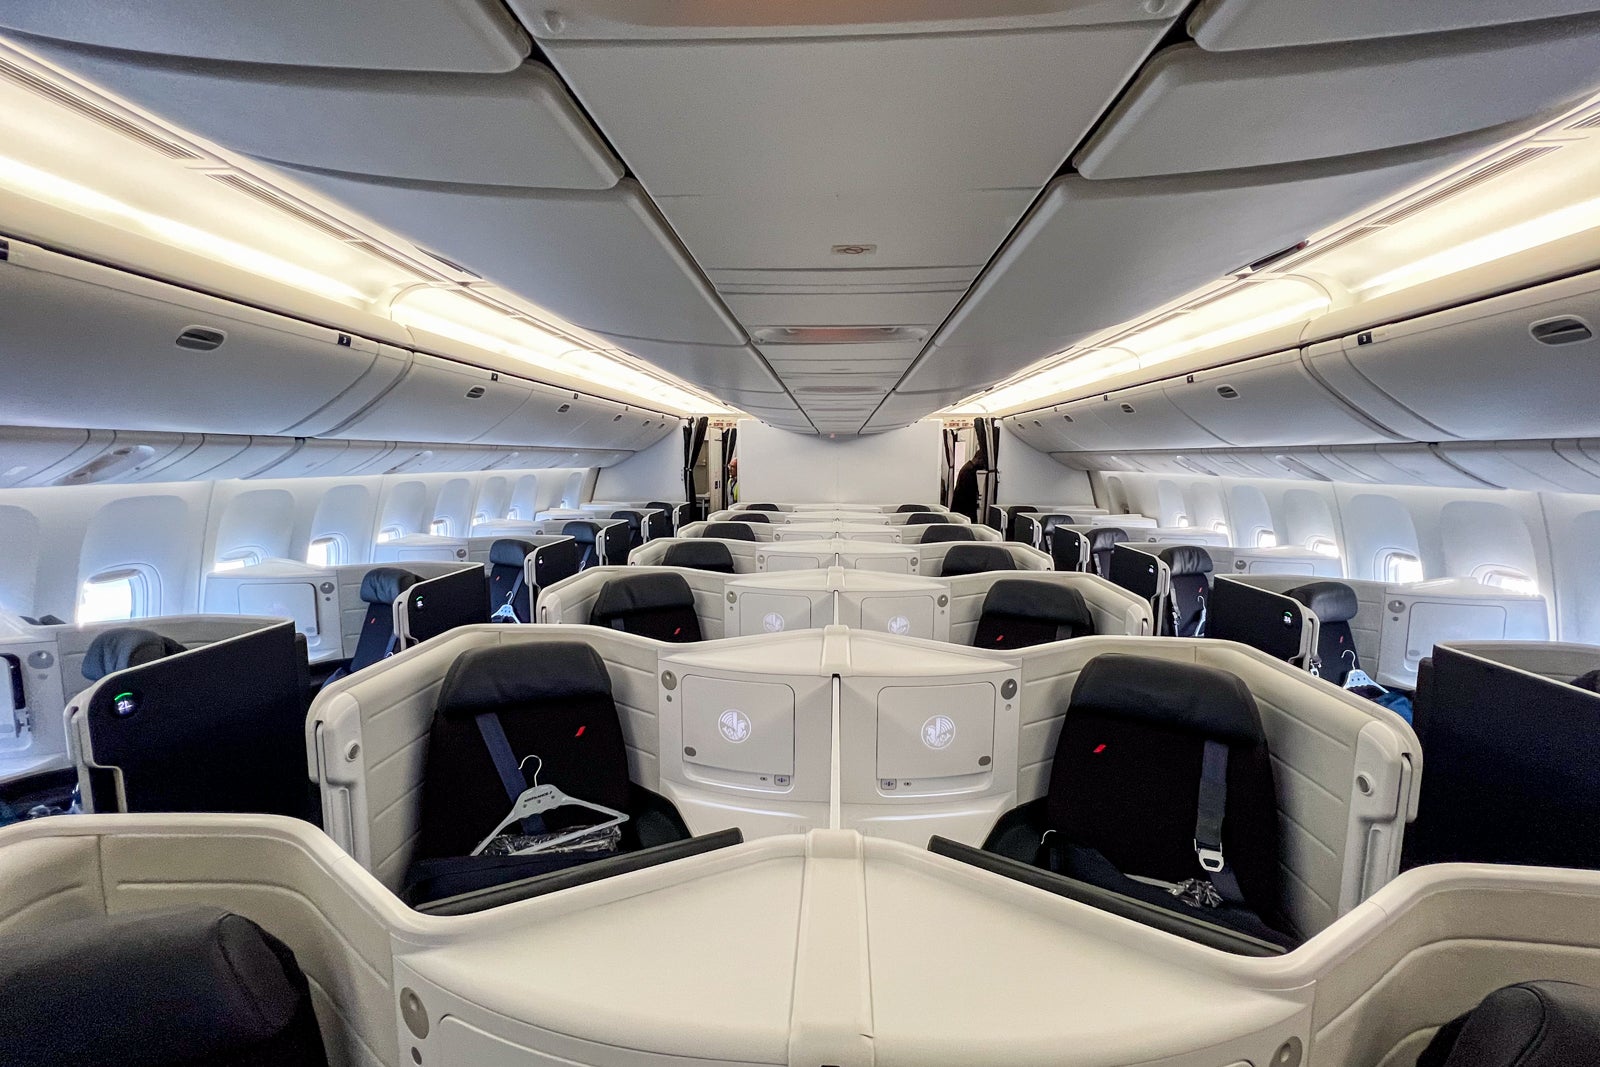 Air France Unveils Redesigned Business Class Seats